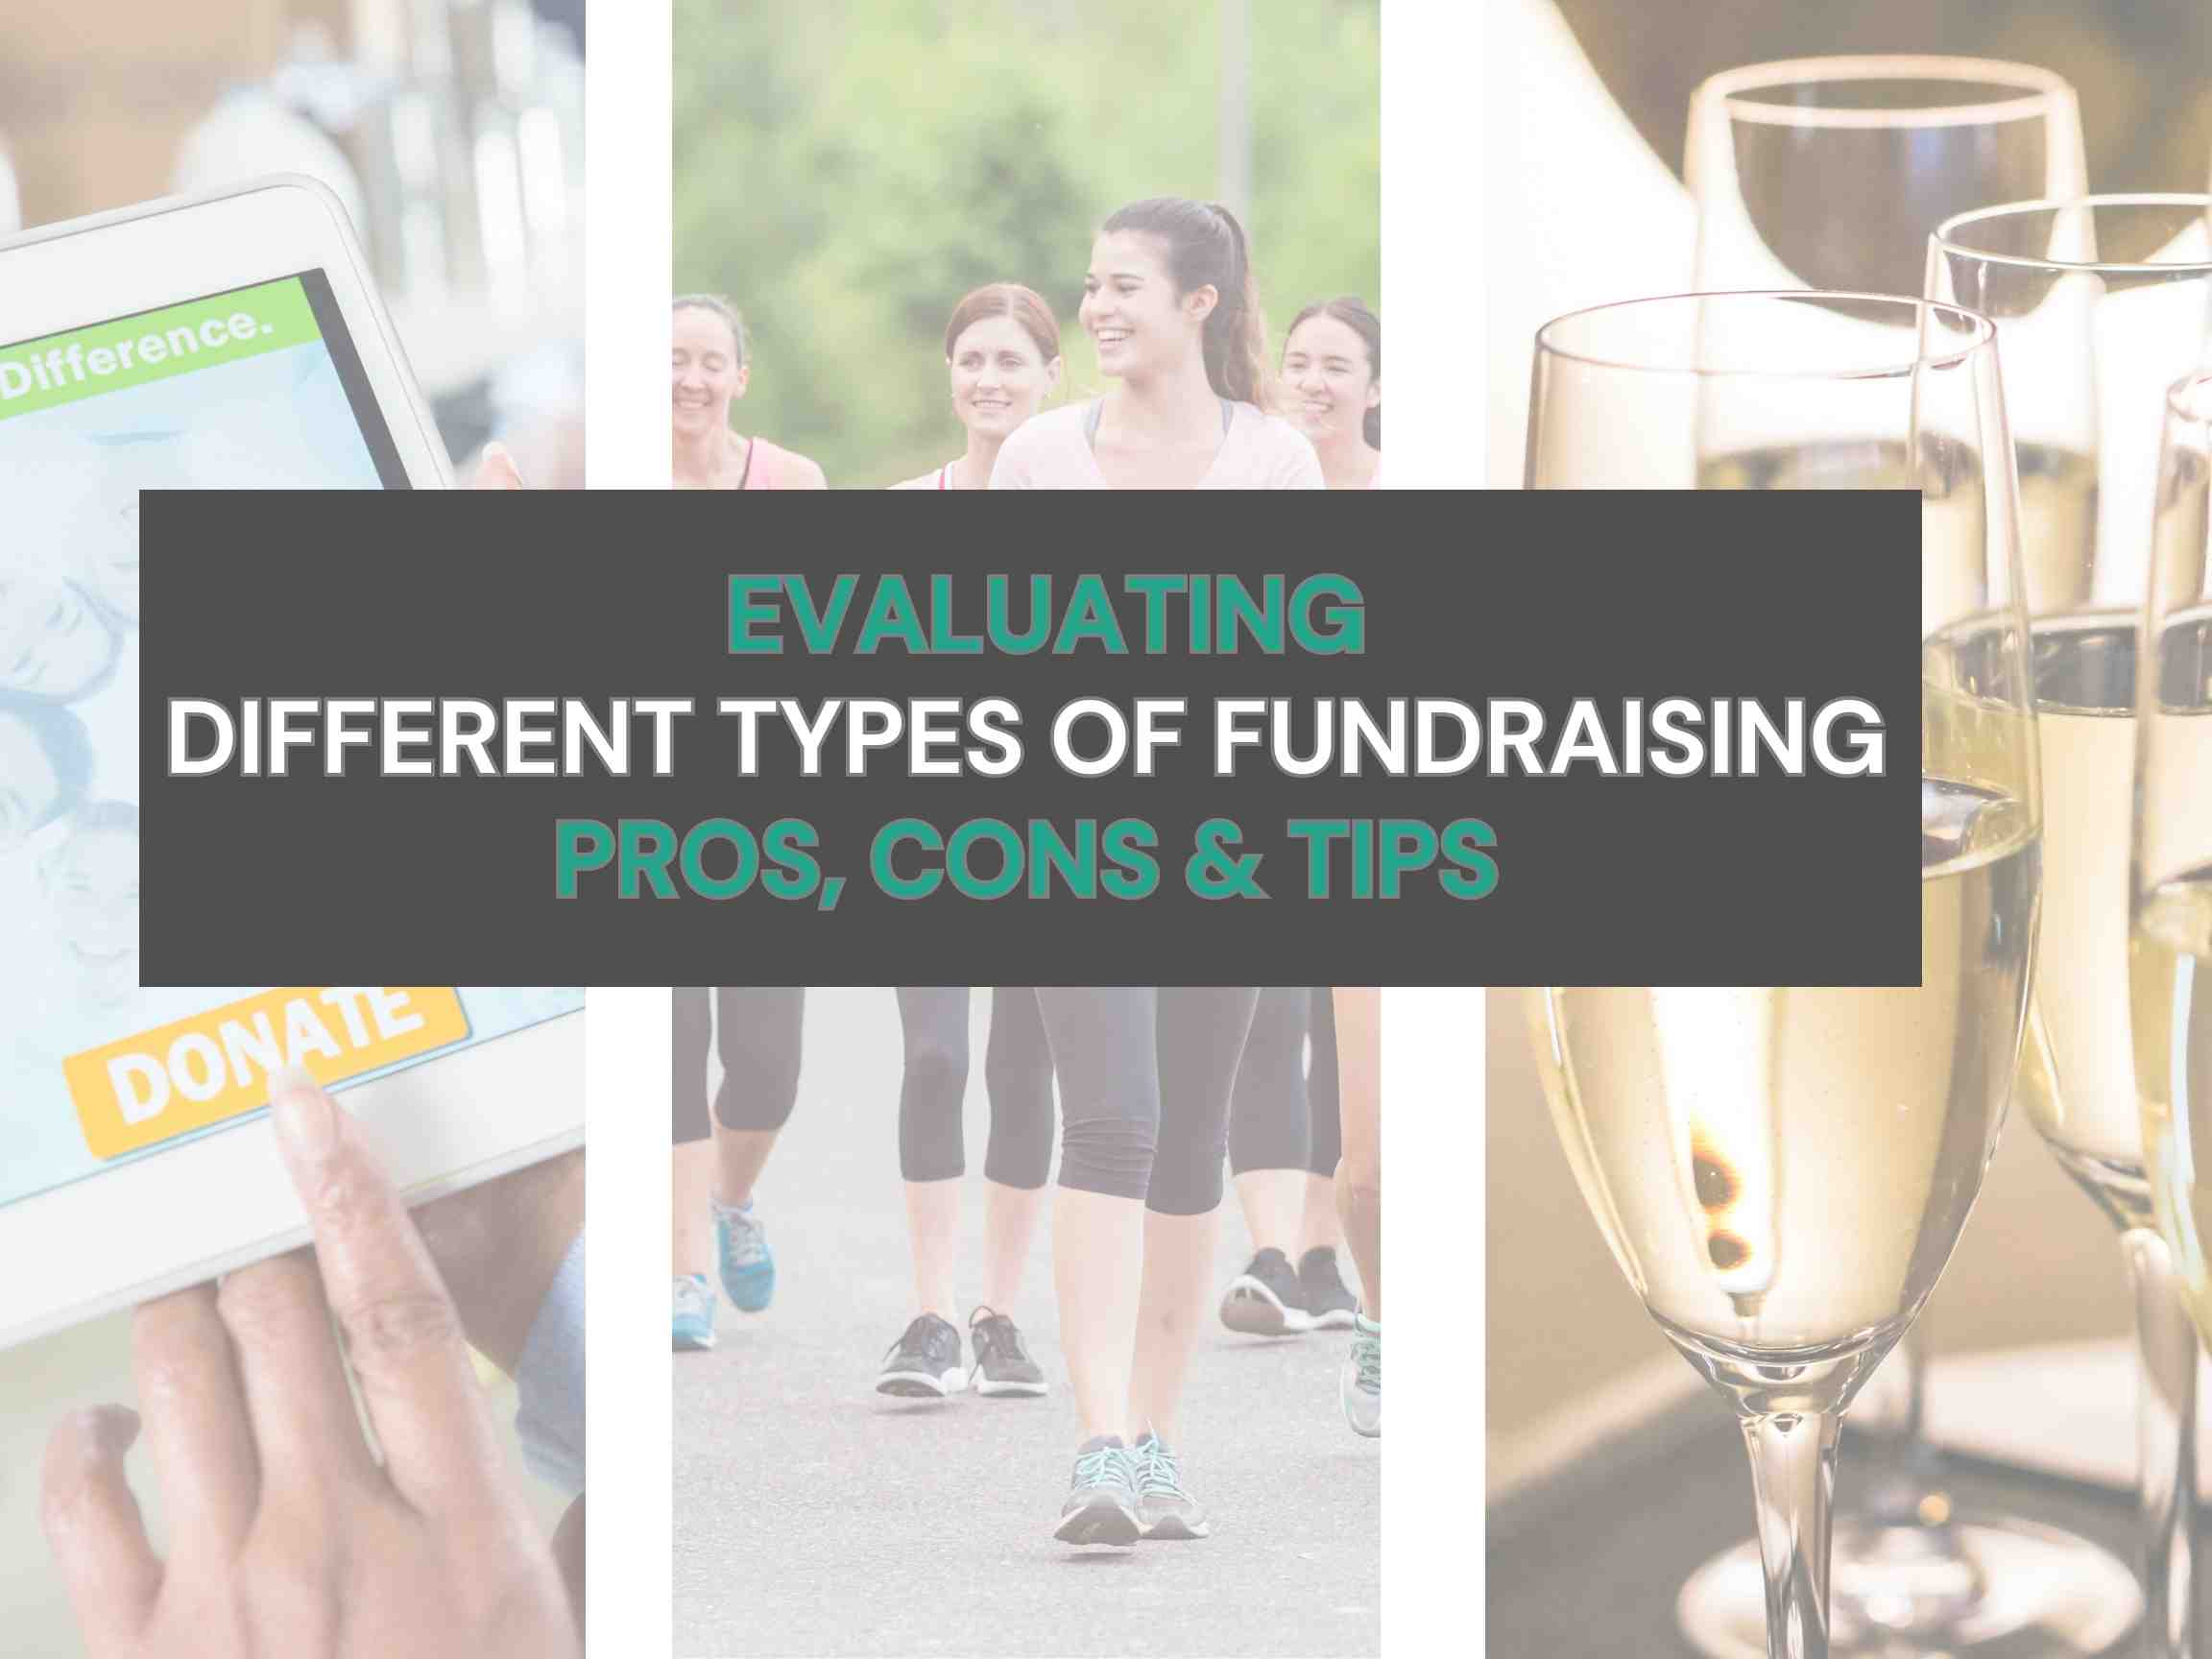 Different types of fundraising